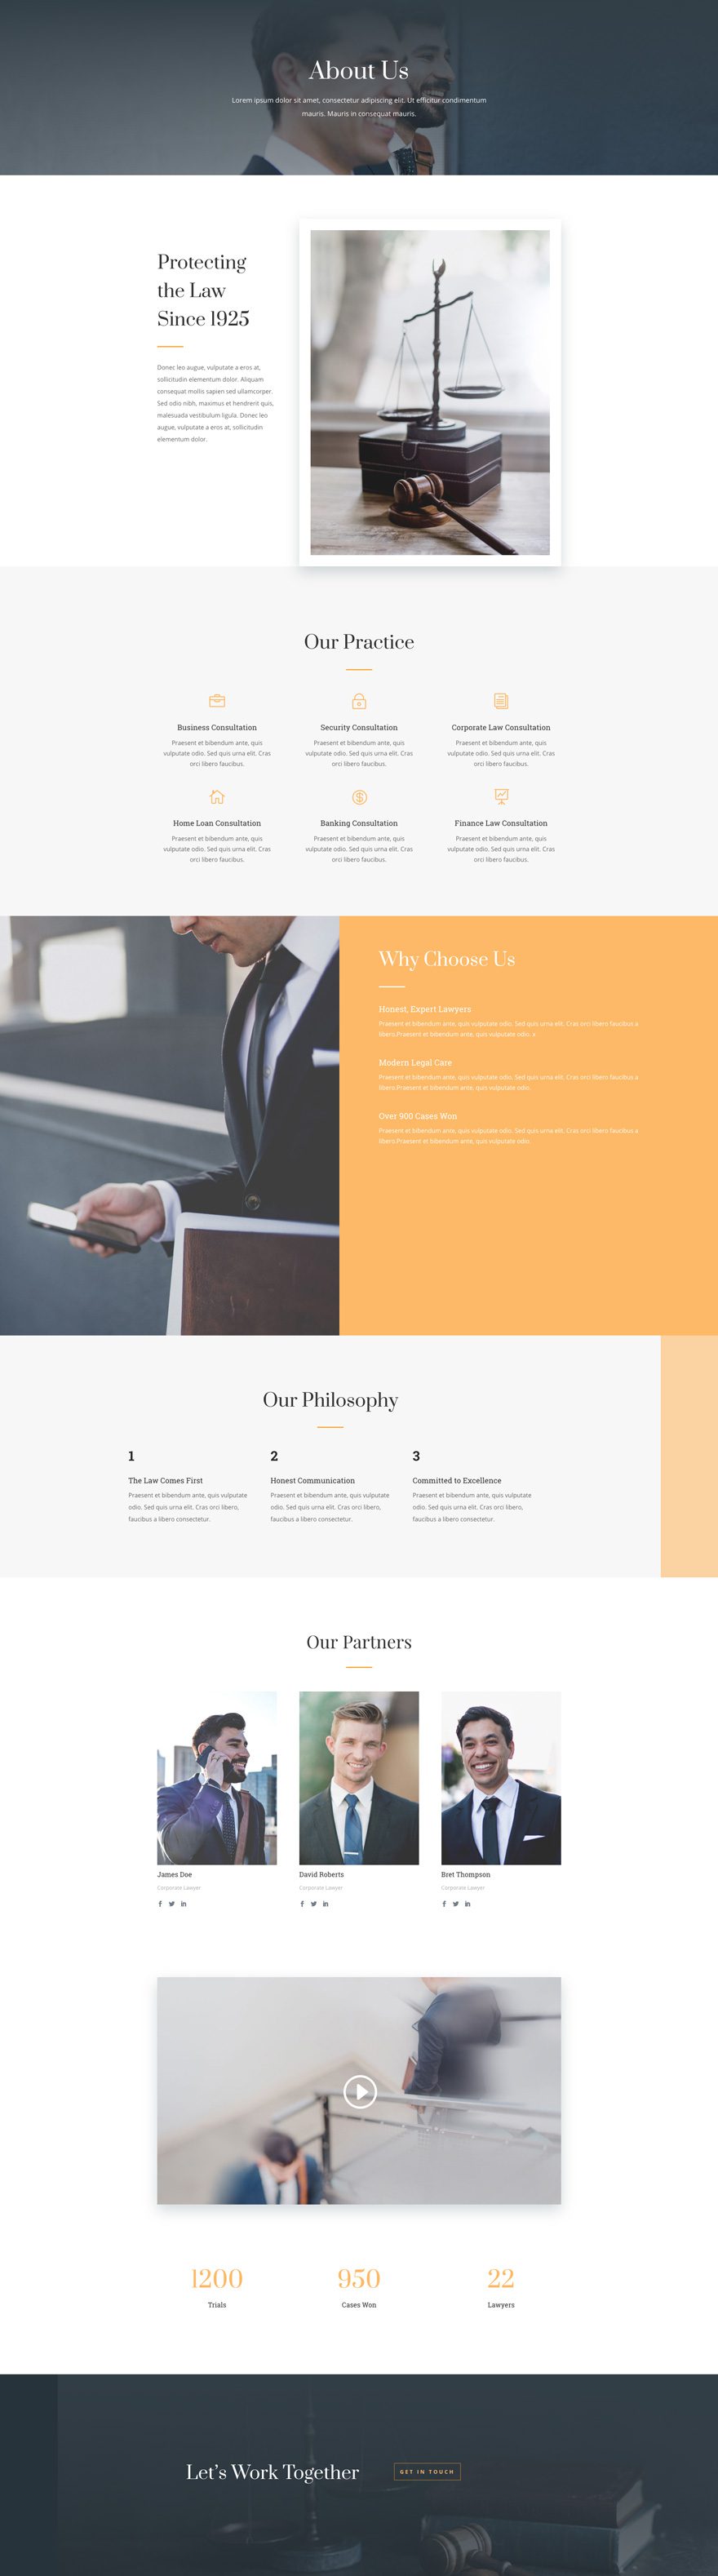 law firm layout about page